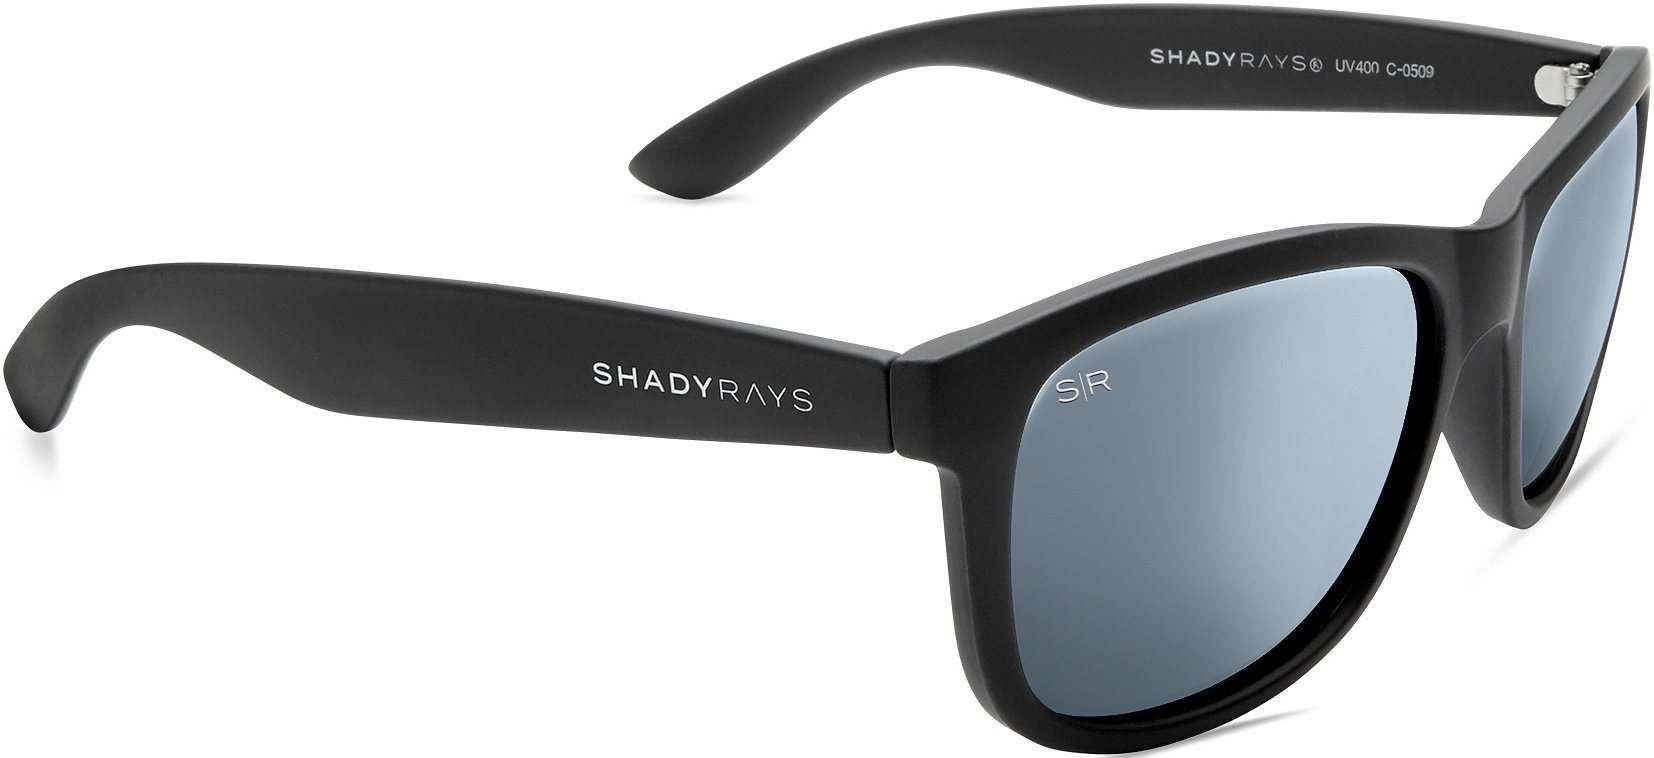 Signature Series - Black Slate SR Pro Polarized Sunglasses | Matte Black Sunglasses | Best Christmas Gifts | Gifts for the Holidays | Unique Gifts for